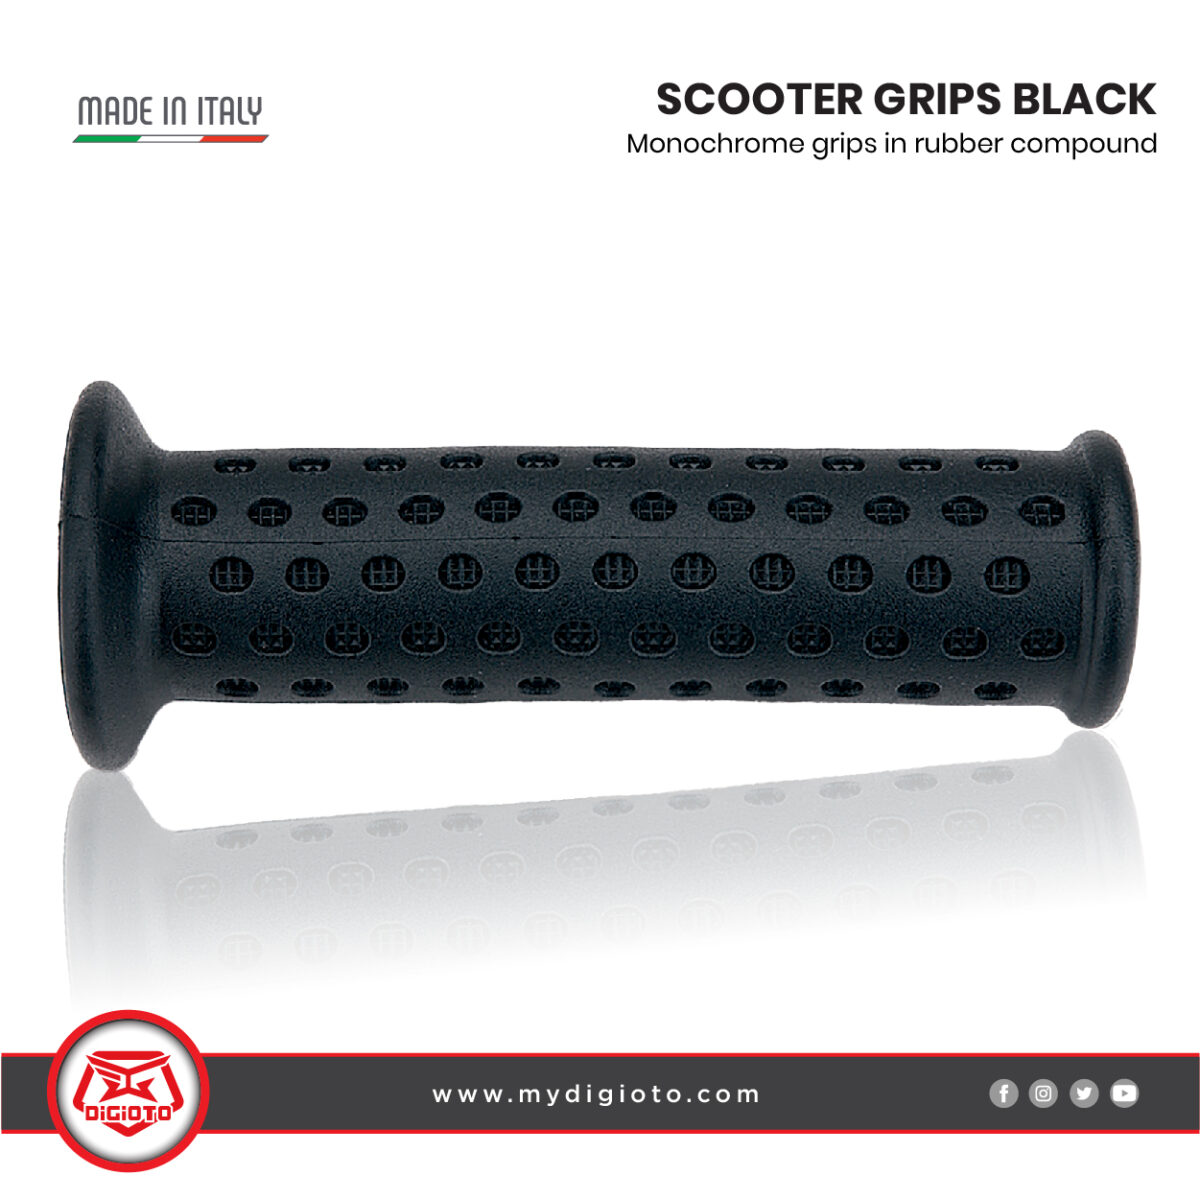 scooter grips